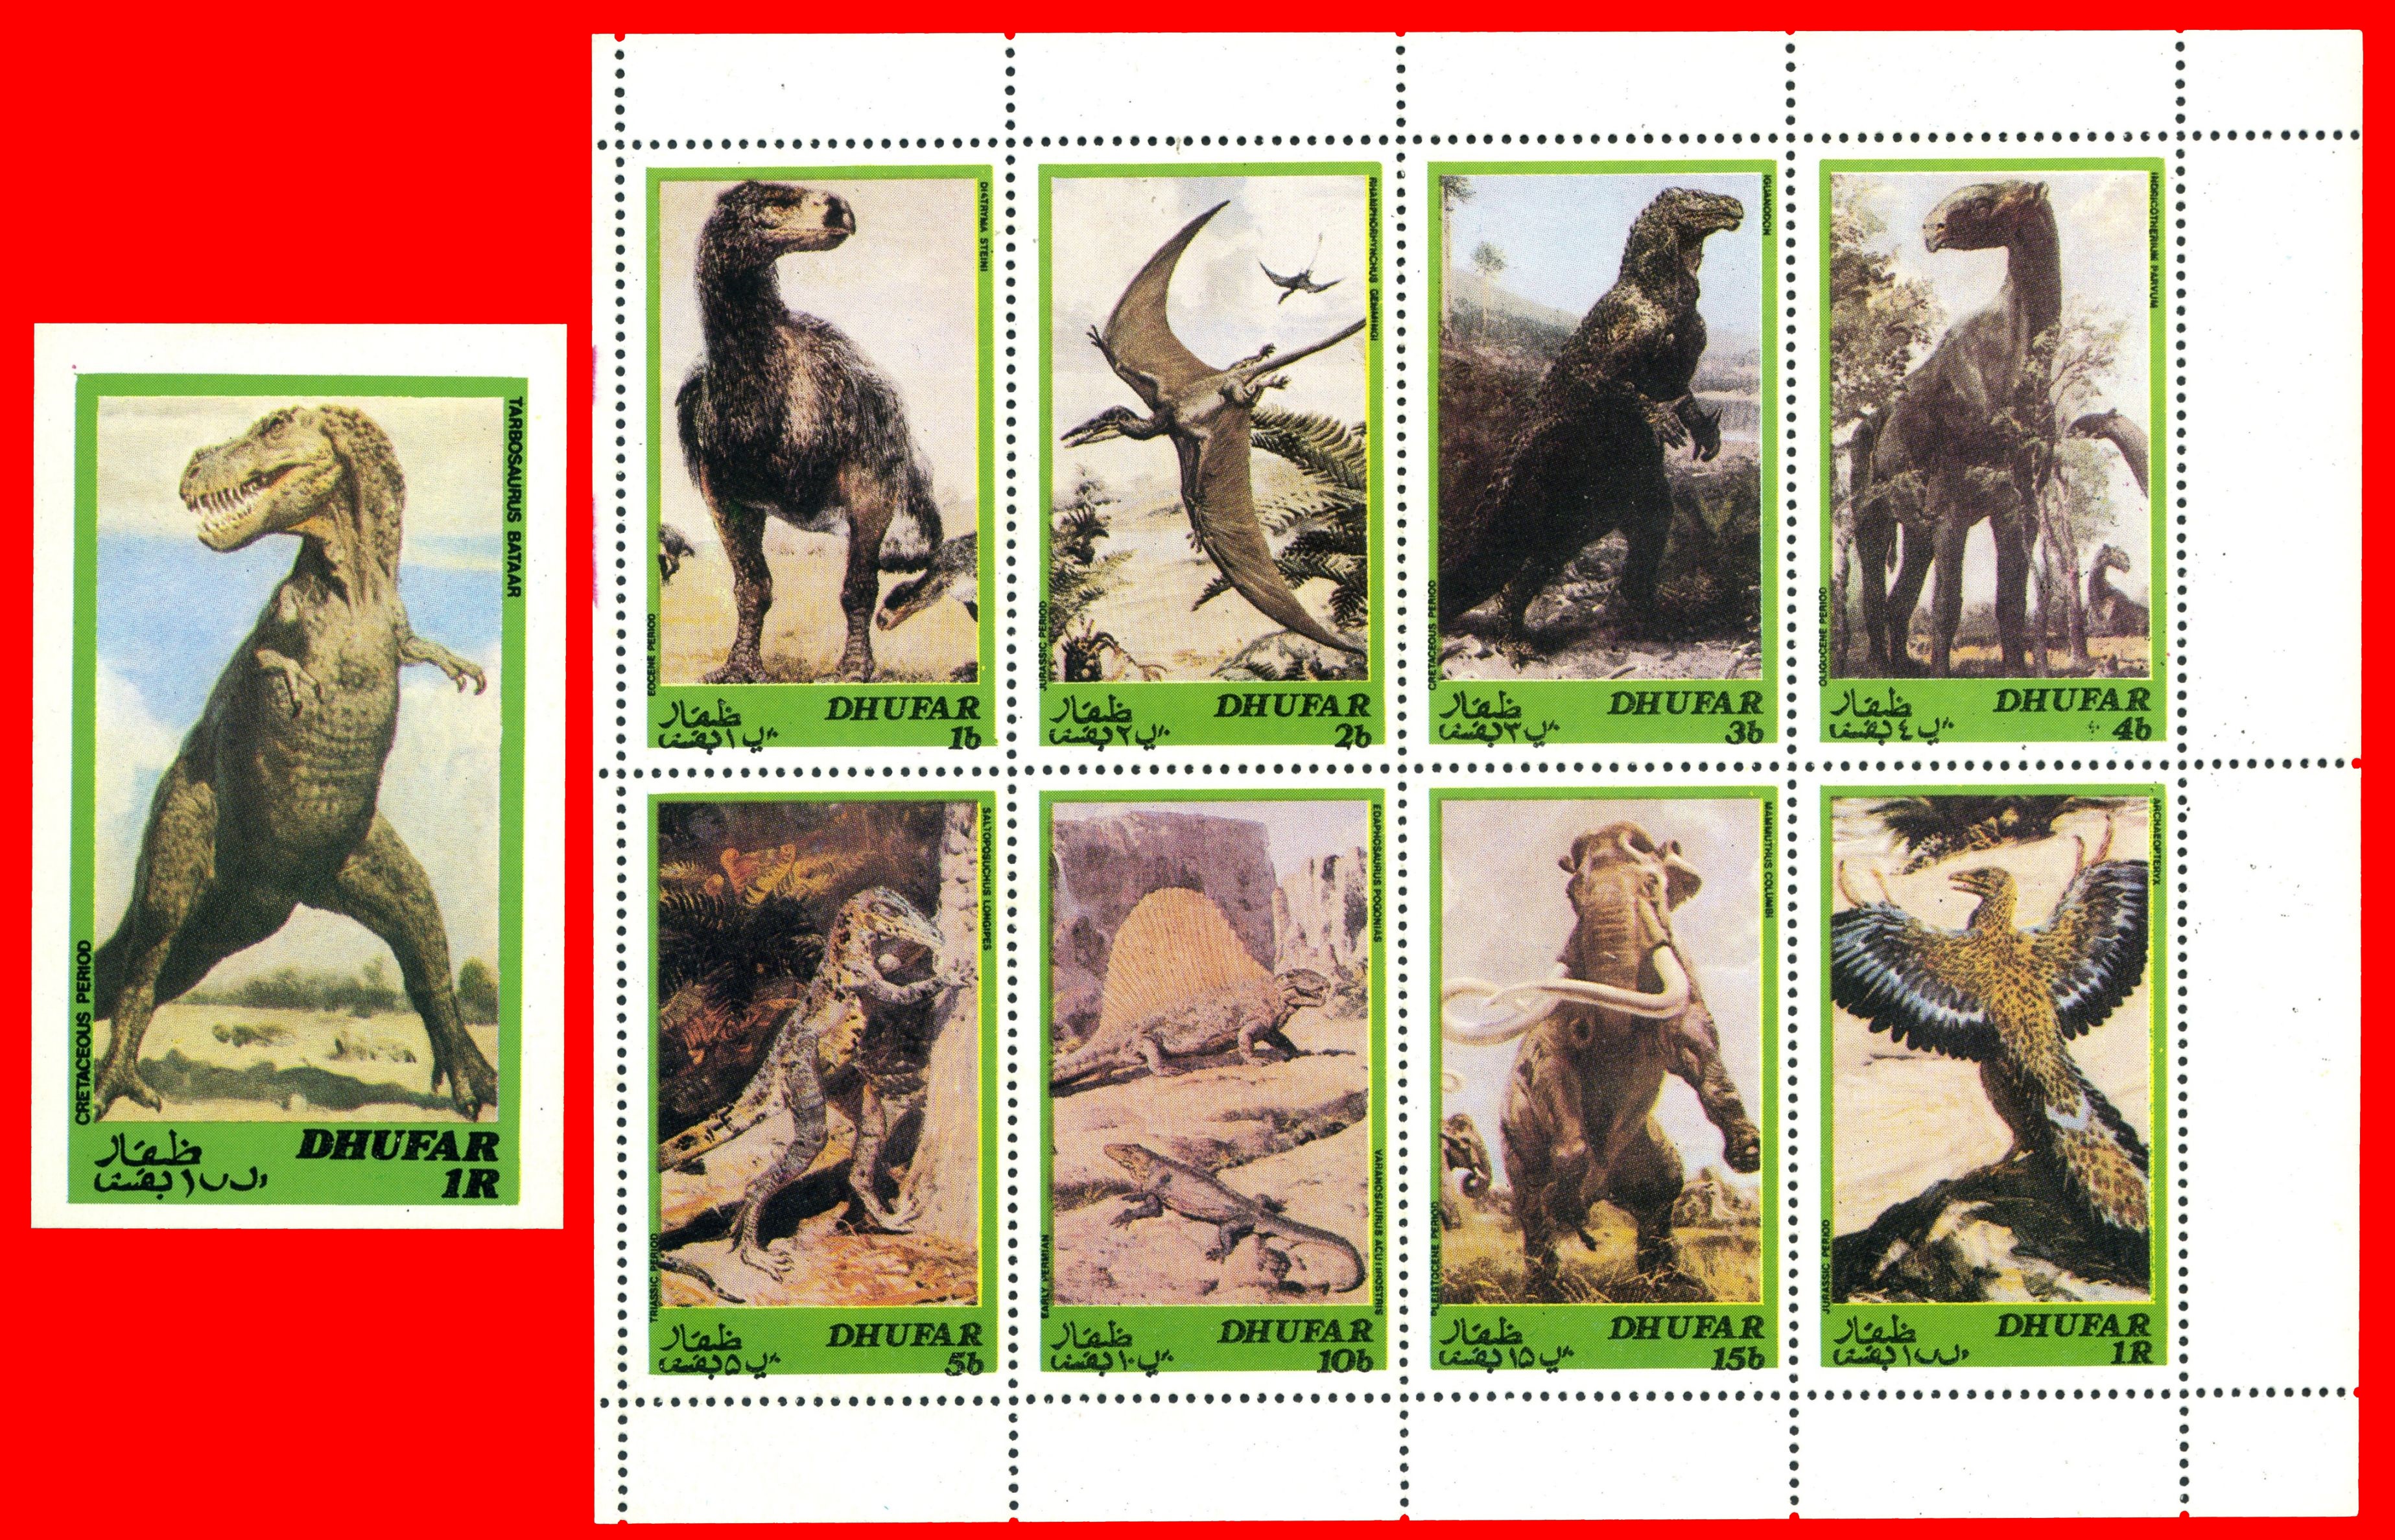 Dinosaurs and other prehistoric animals on illegal stamps of Dhufar, issued by rebel group in 1980